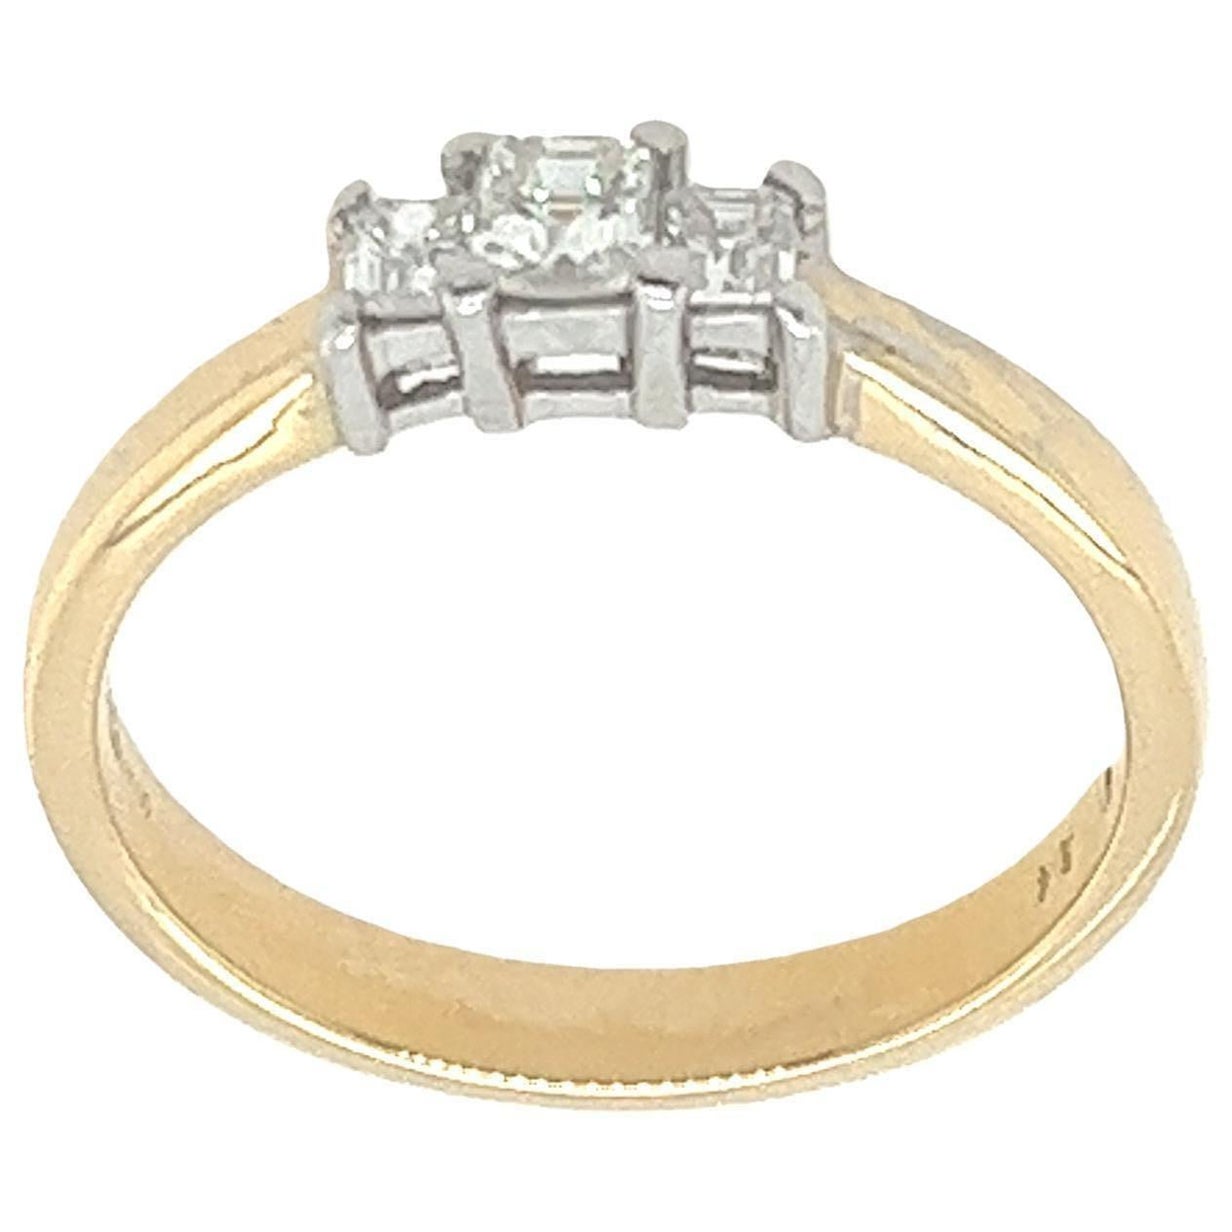 3-Stone Diamond Ring, Set With 0.35ct of Diamonds In 18ct Yellow & White Gold For Sale